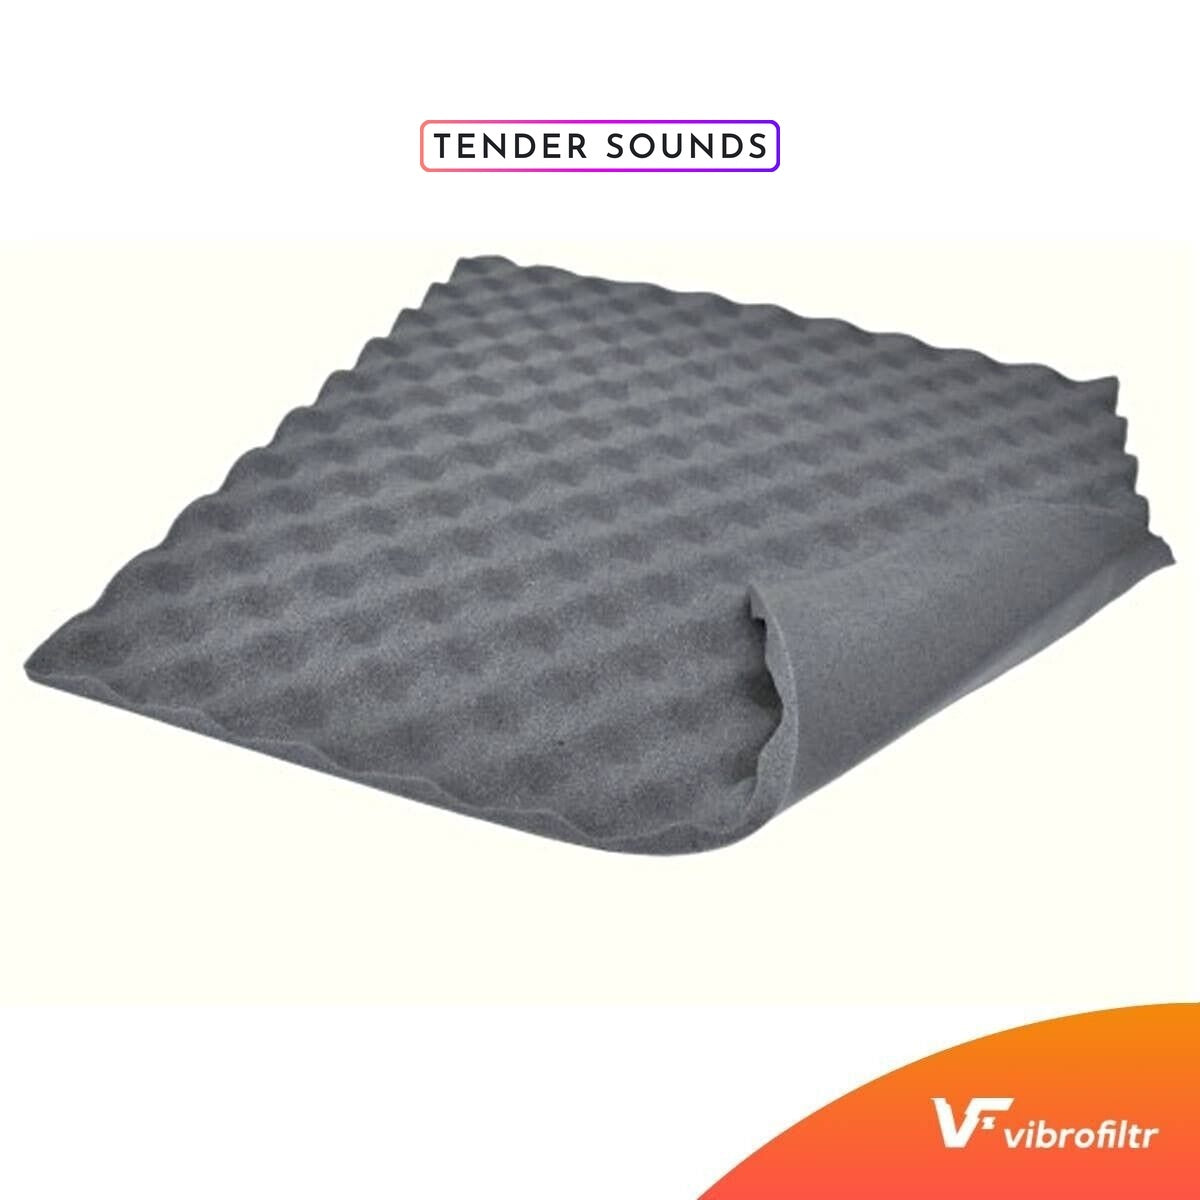 Vibrofiltr Autoshim Wave 15mm Eggcrate Sound Wave Foam 500mm x 500mm x 10 sheets 27ft2 or 2.5m2